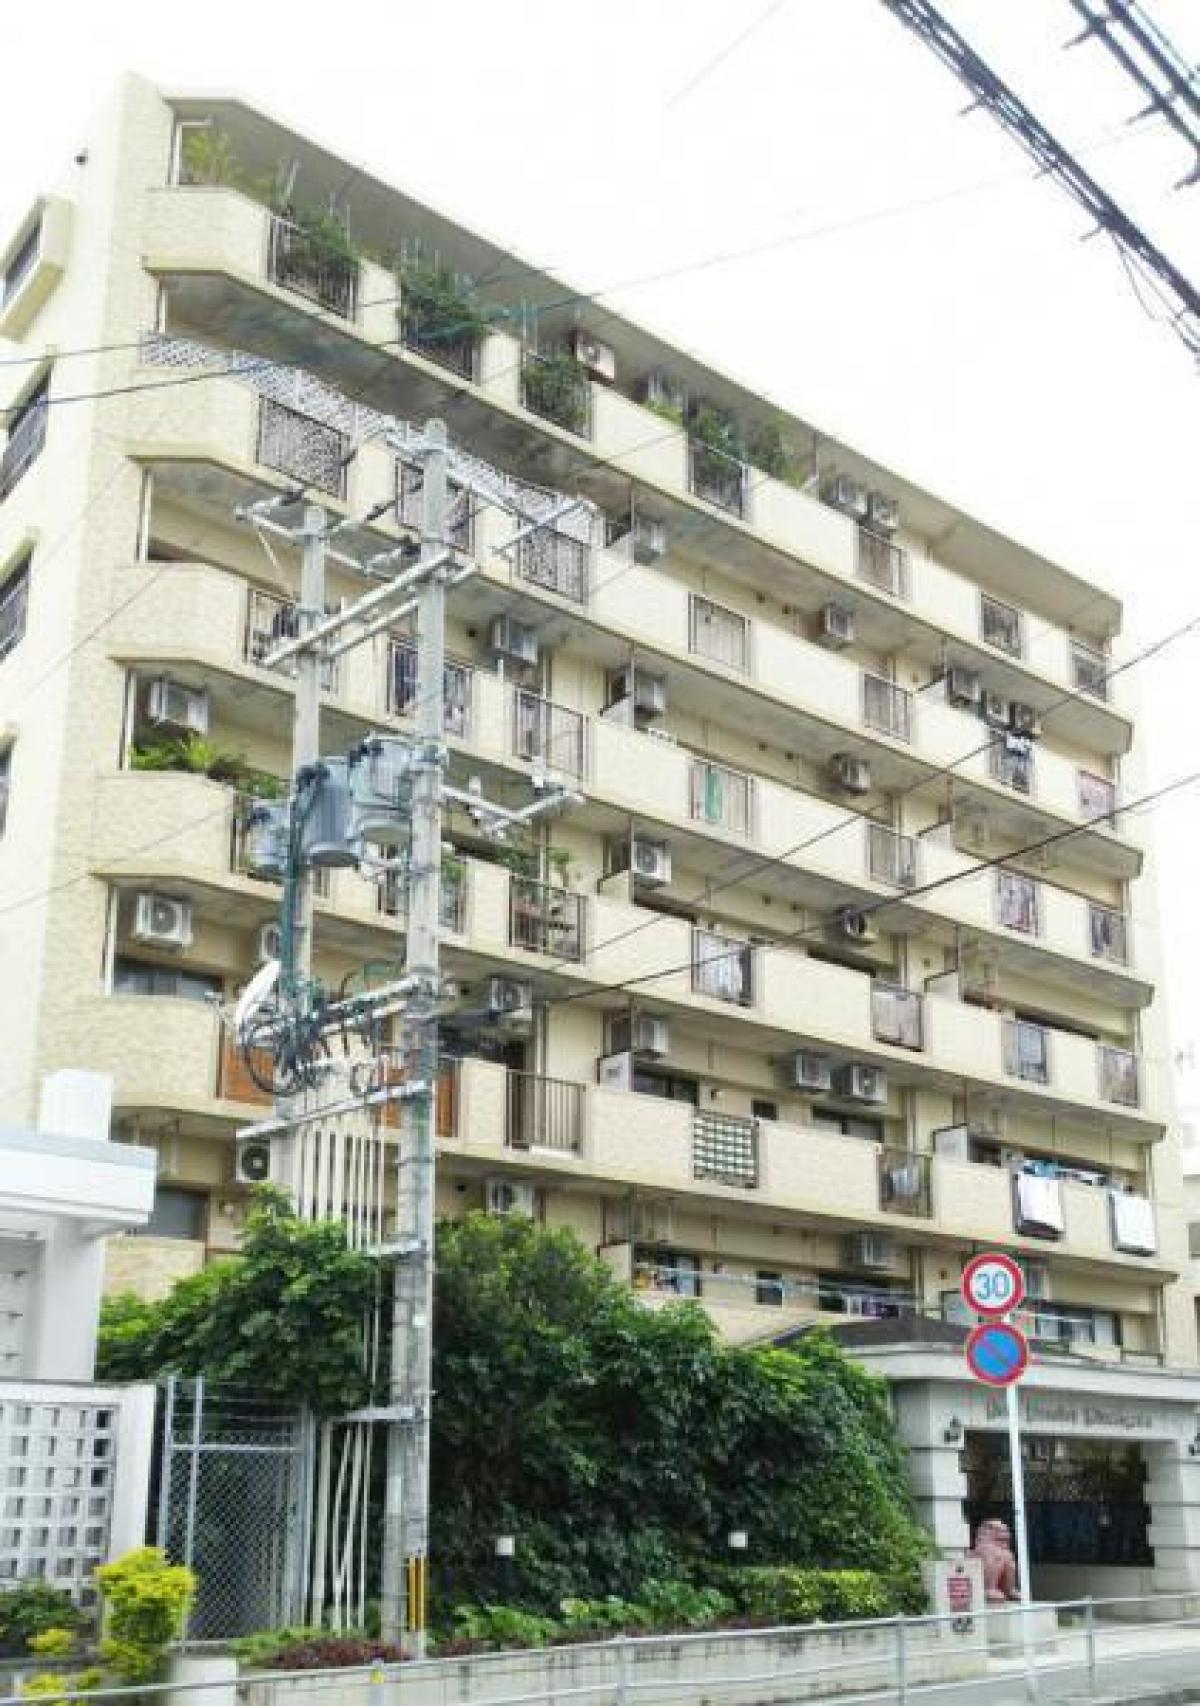 Picture of Apartment For Sale in Urasoe Shi, Okinawa, Japan